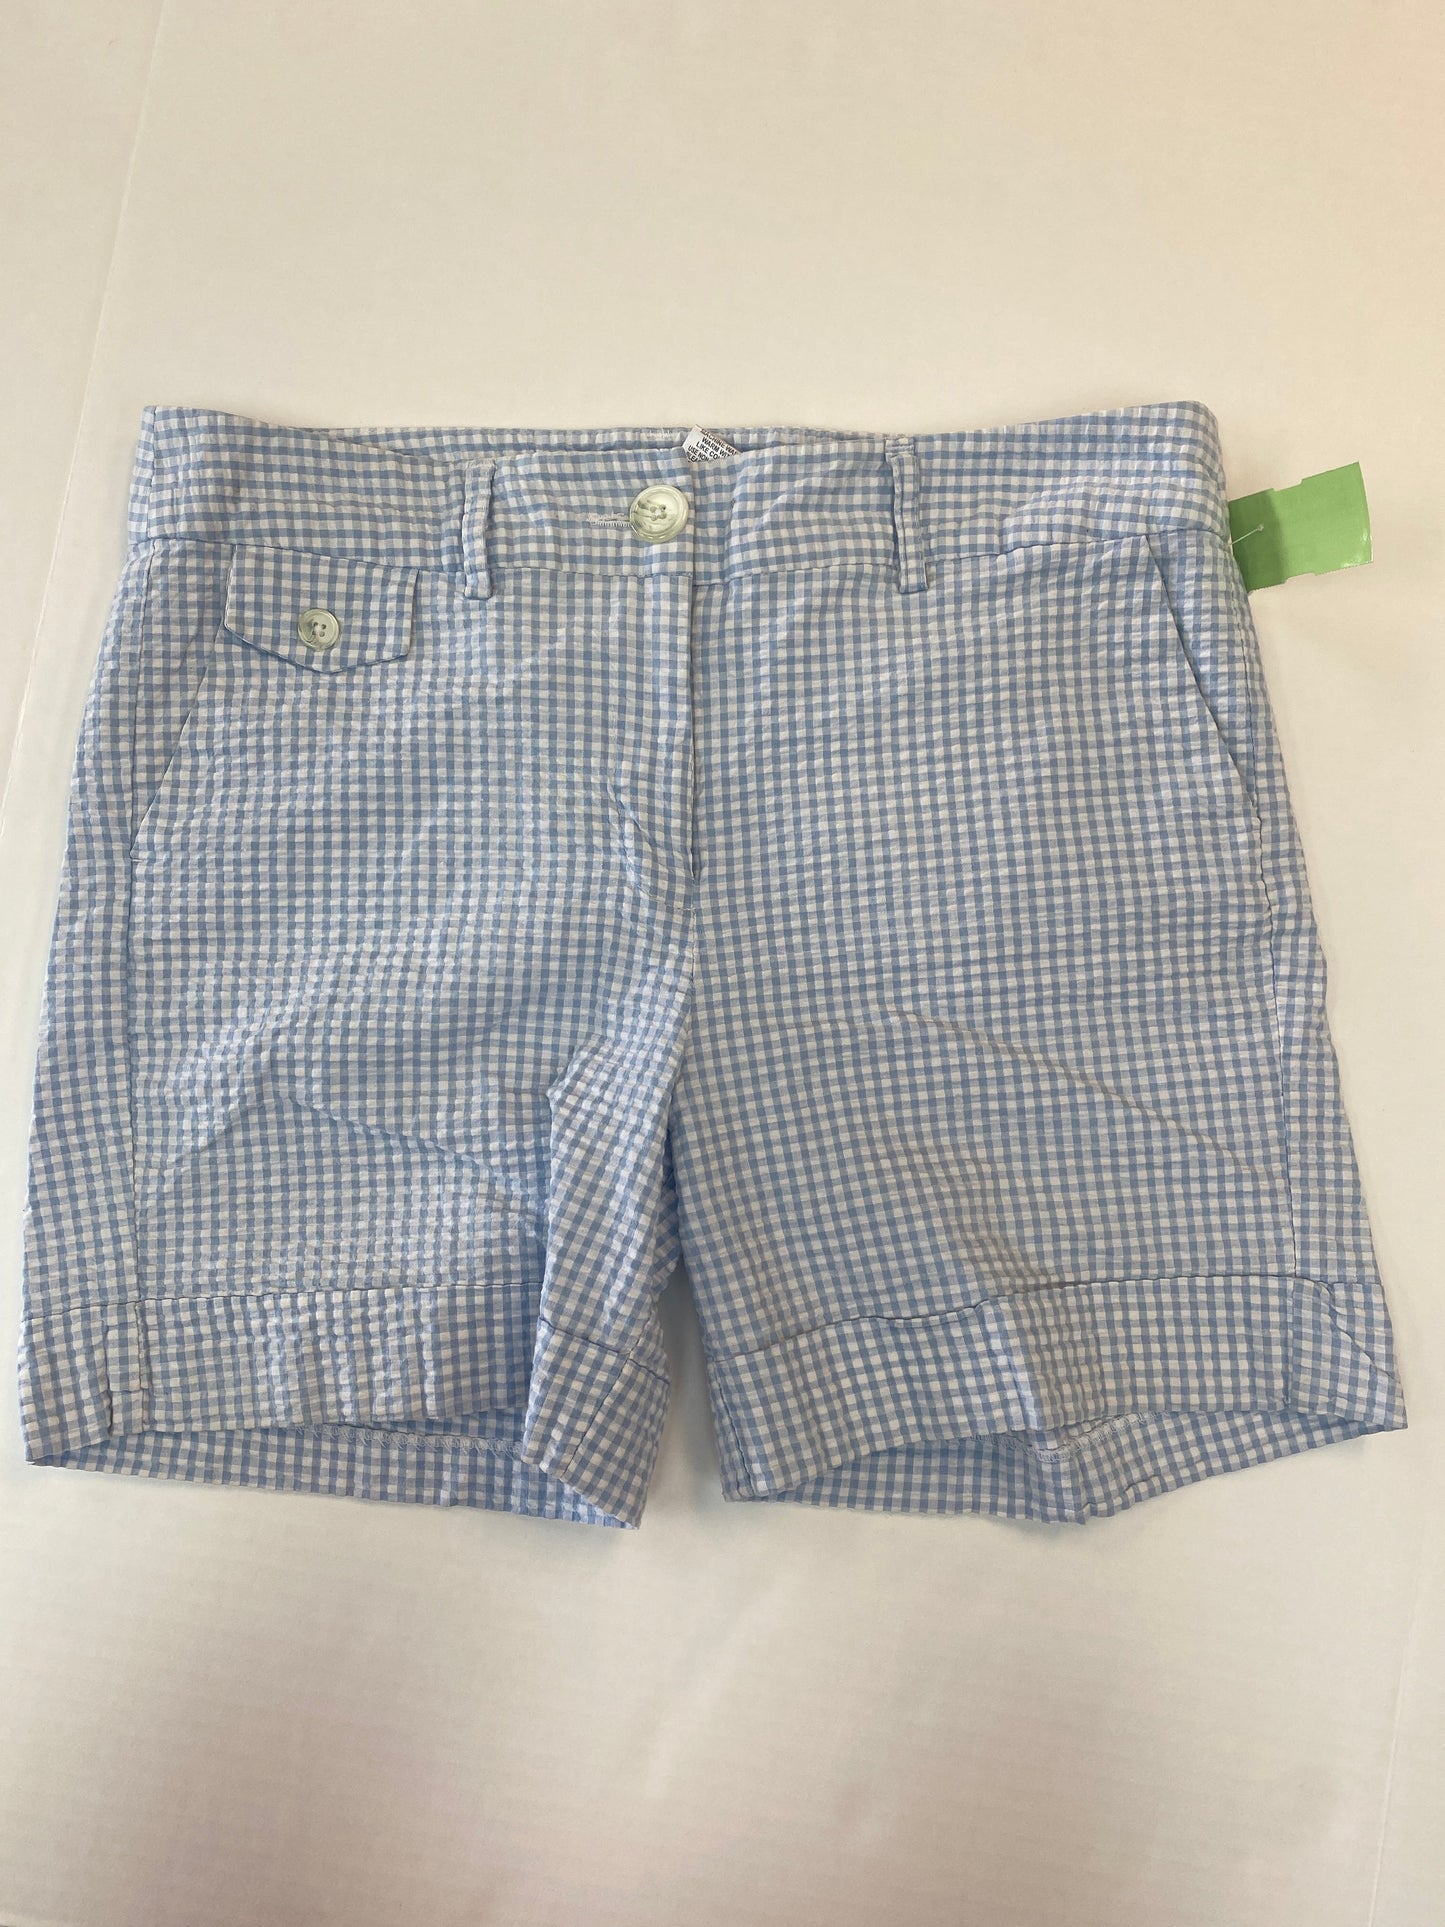 Shorts By Clothes Mentor  Size: 10